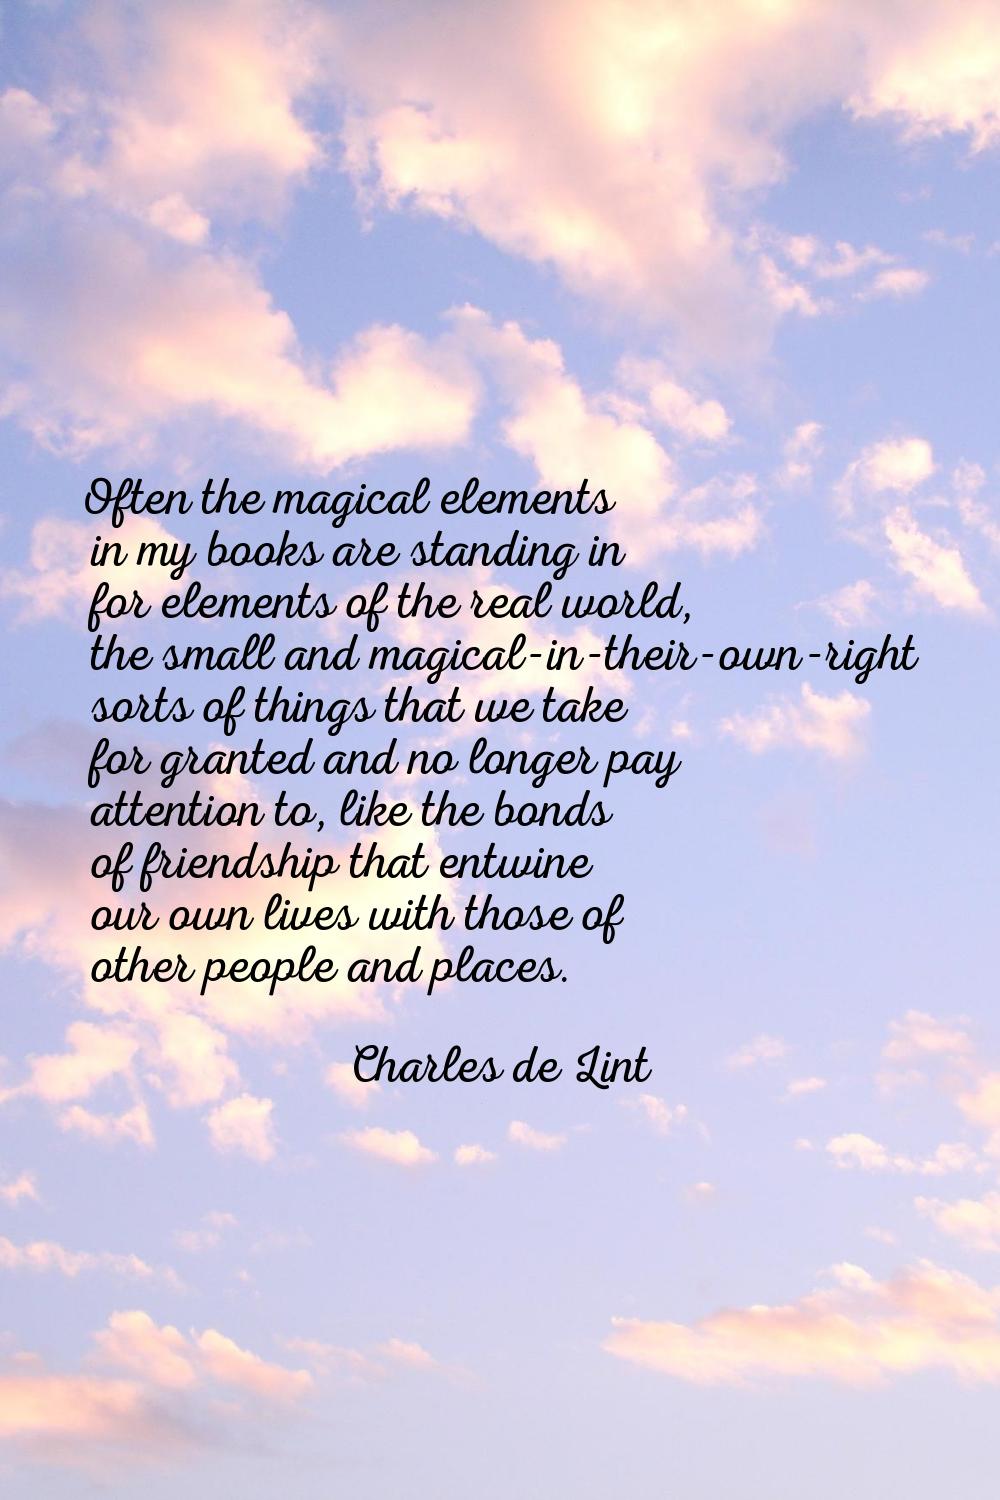 Often the magical elements in my books are standing in for elements of the real world, the small an